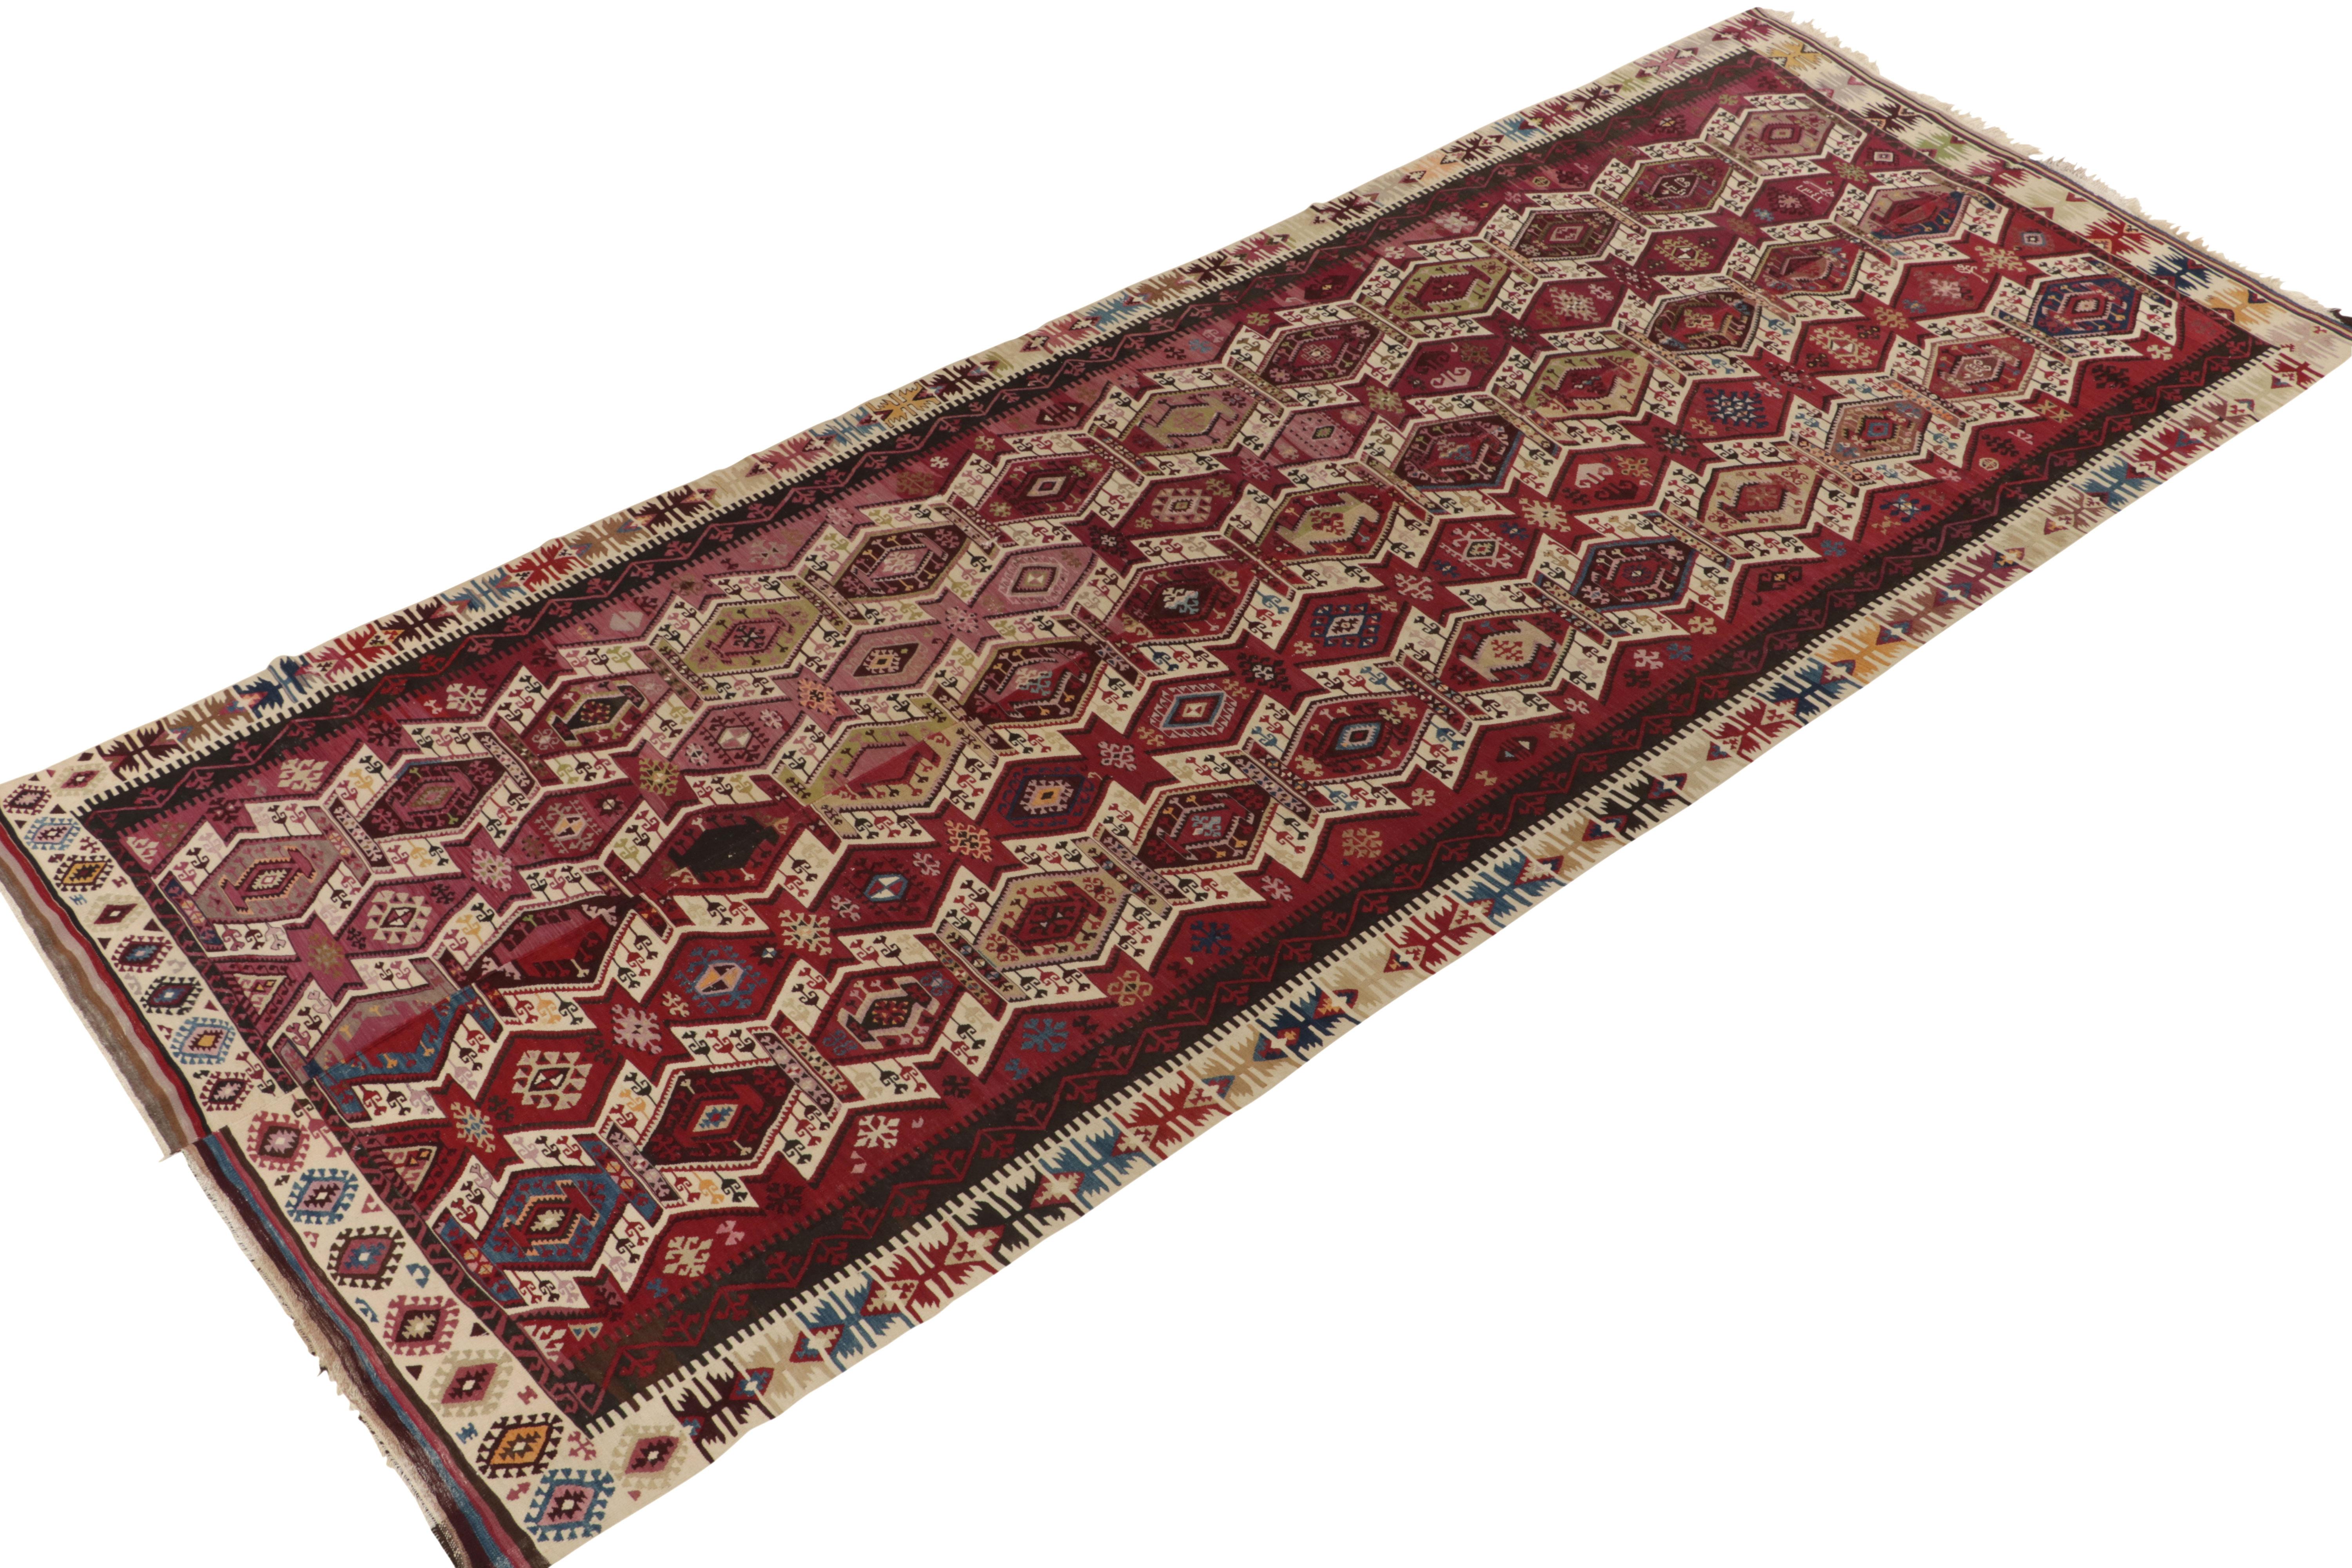 Connoting the celebrated tribal style, this 6x13 kilim rug hails from a special new curation of mid century flat weaves. This flatweave from Turkey enjoys a rare and desirable shade of red in the background. The wine-red hue with a lighter abrashed